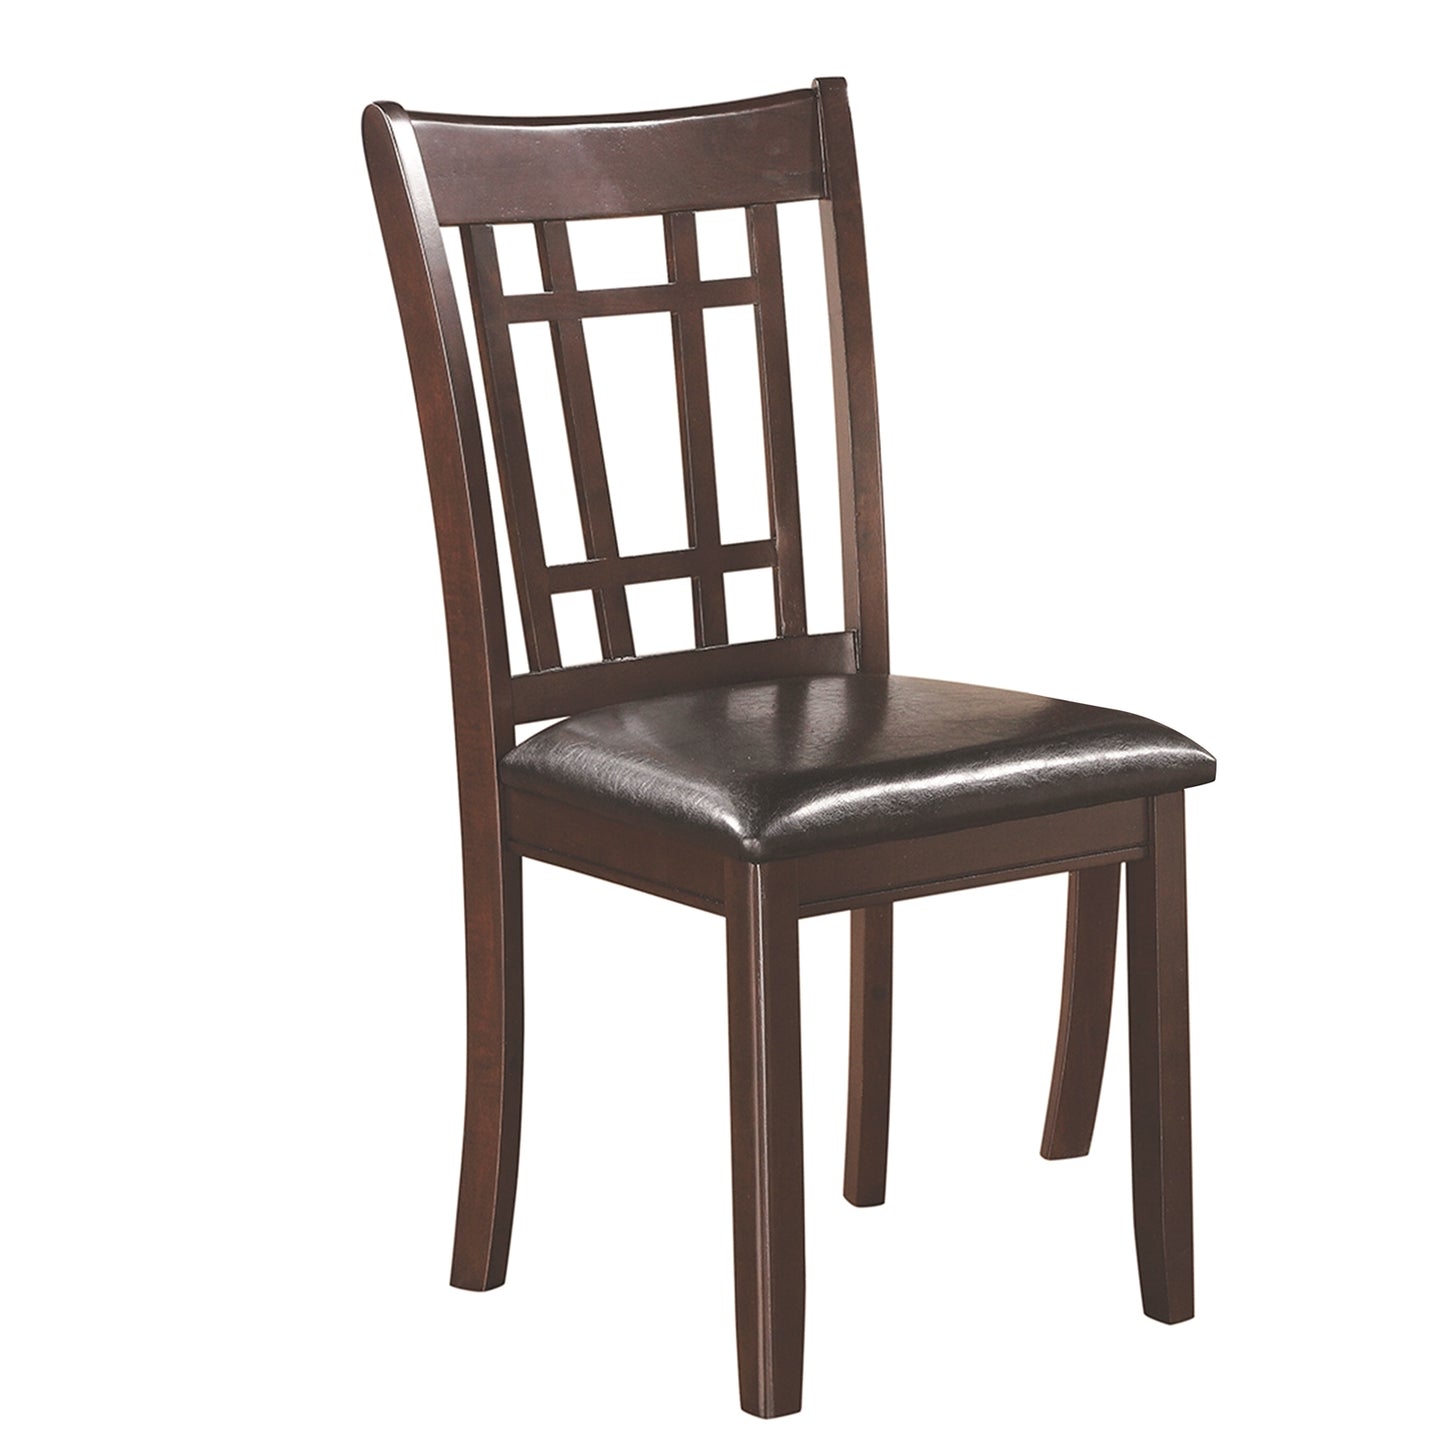 Lavon Transitional Espresso Side Chair Set of 2 Chairs